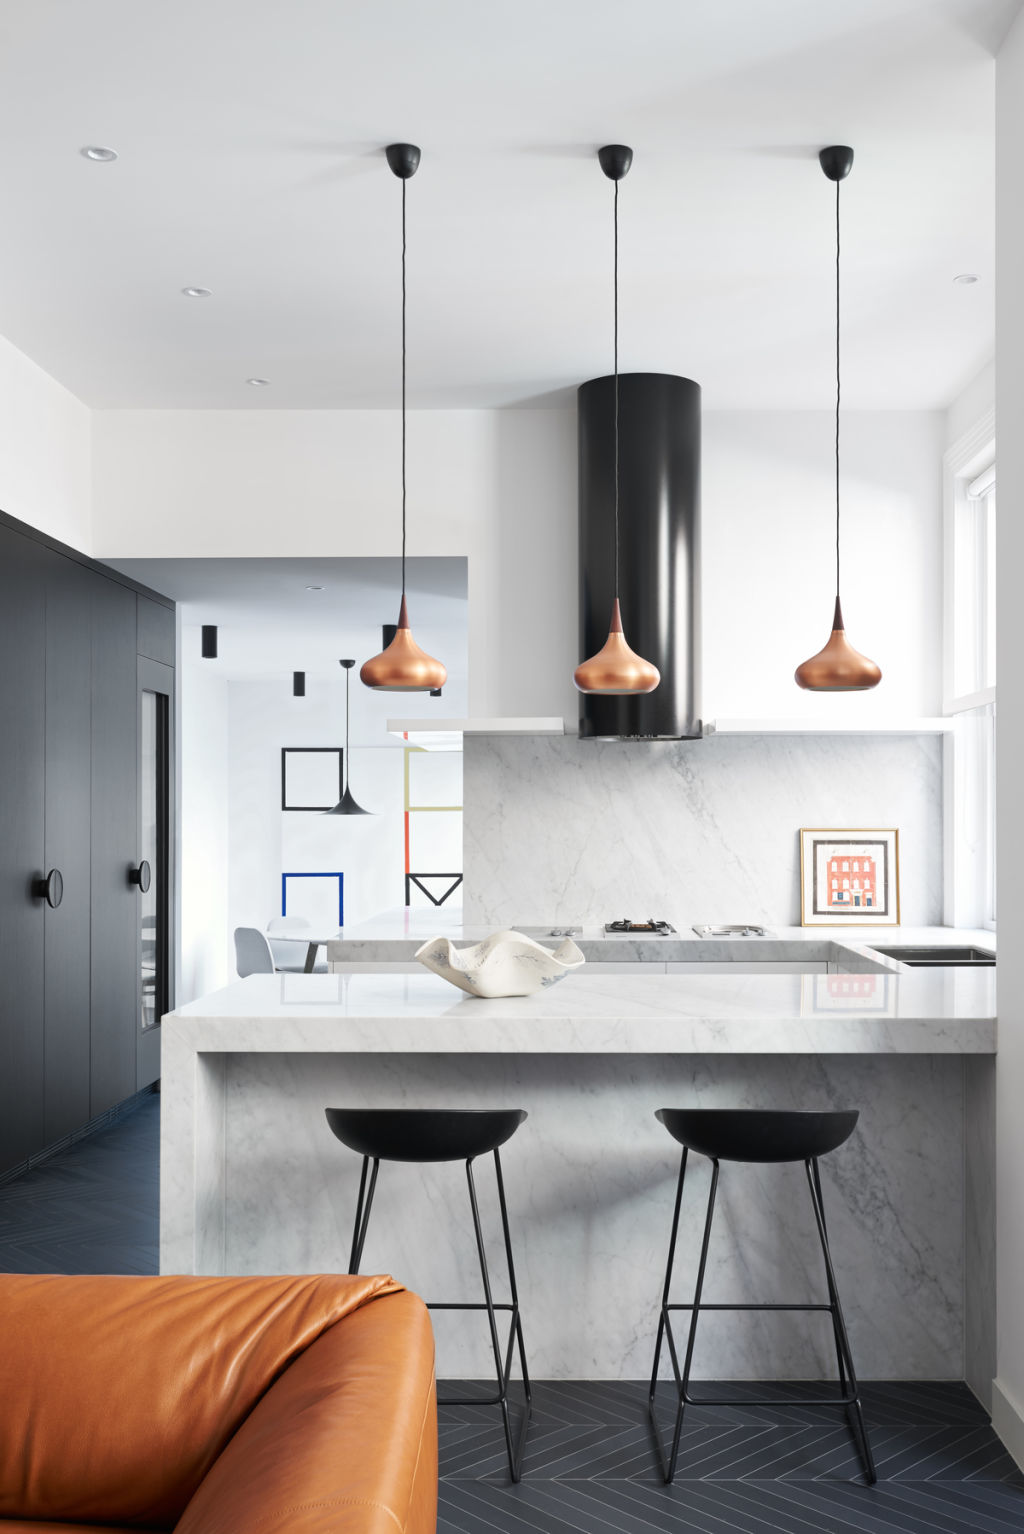 Stone and timber hum beautifully alongside copper and brass fixtures.  Photo: Dan Hocking